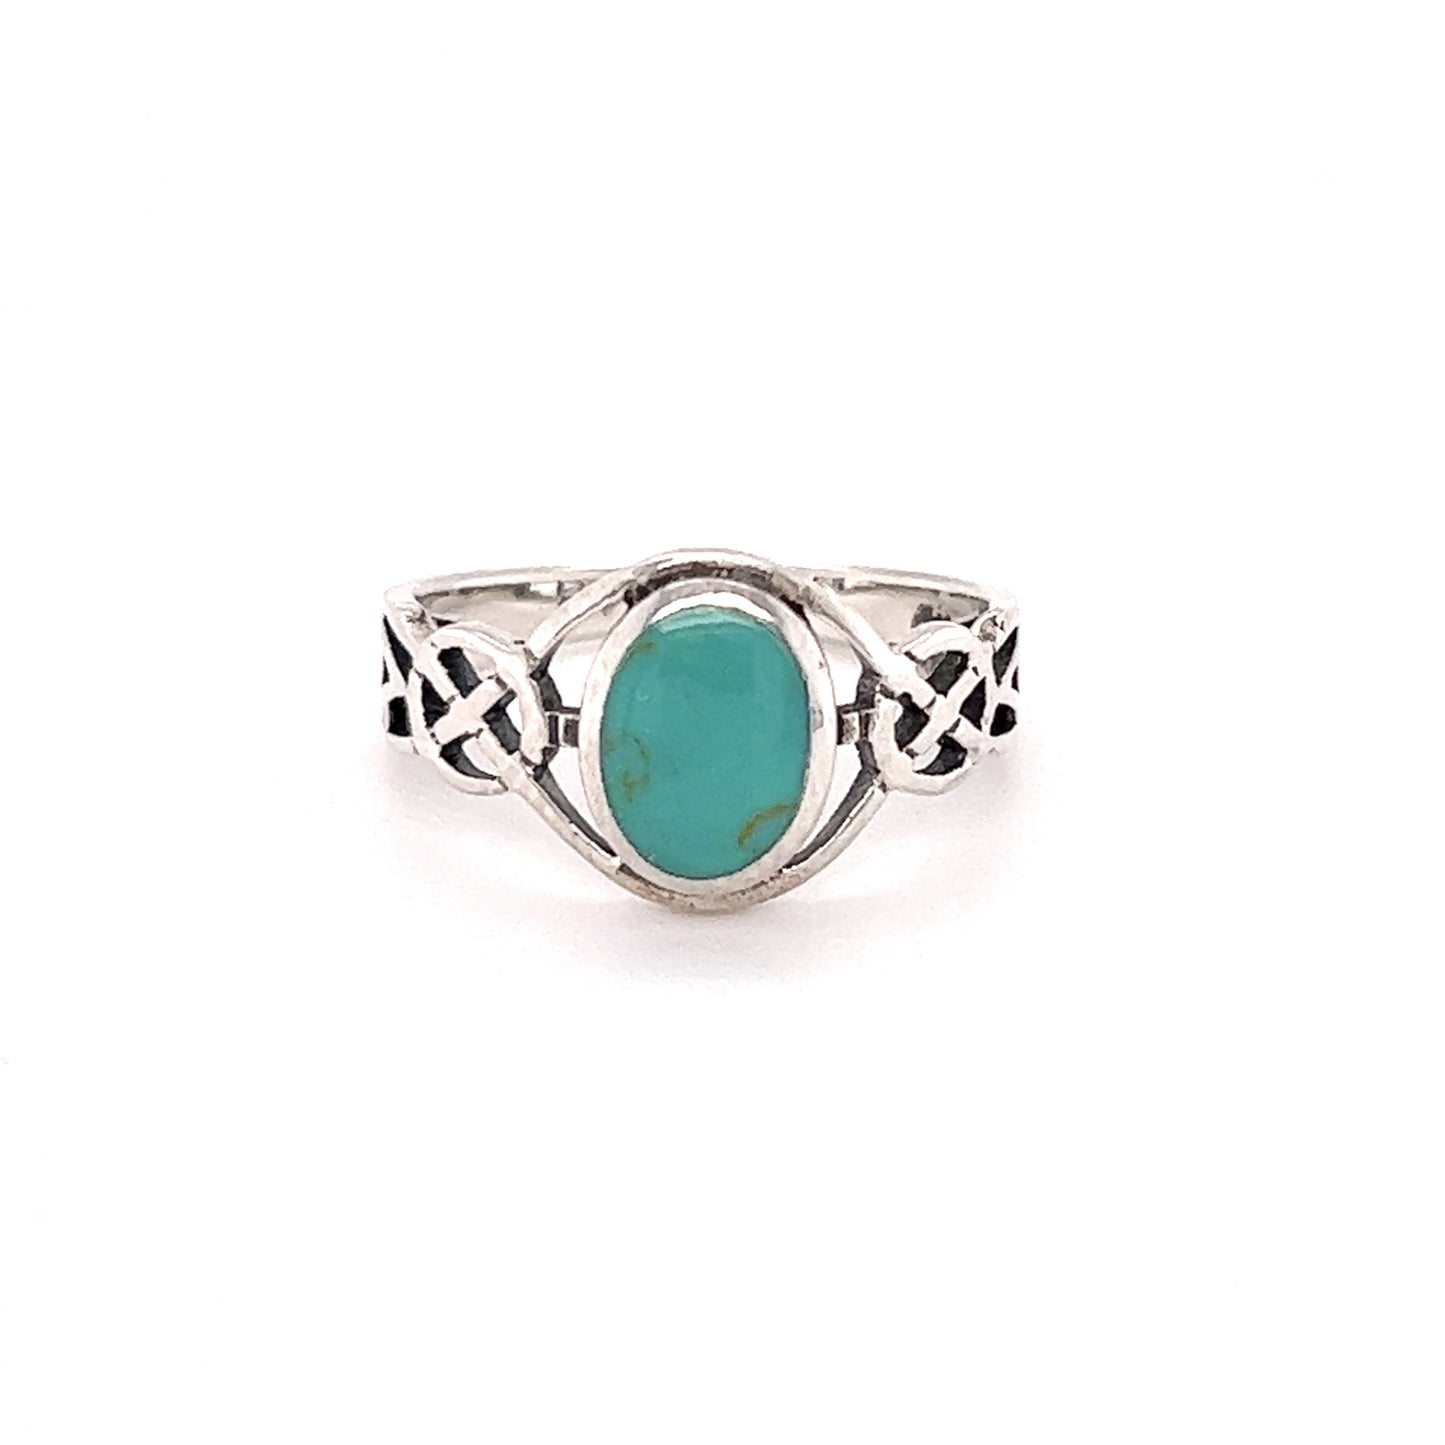 A silver ring with an Inlay Turquoise Braided Knot stone.